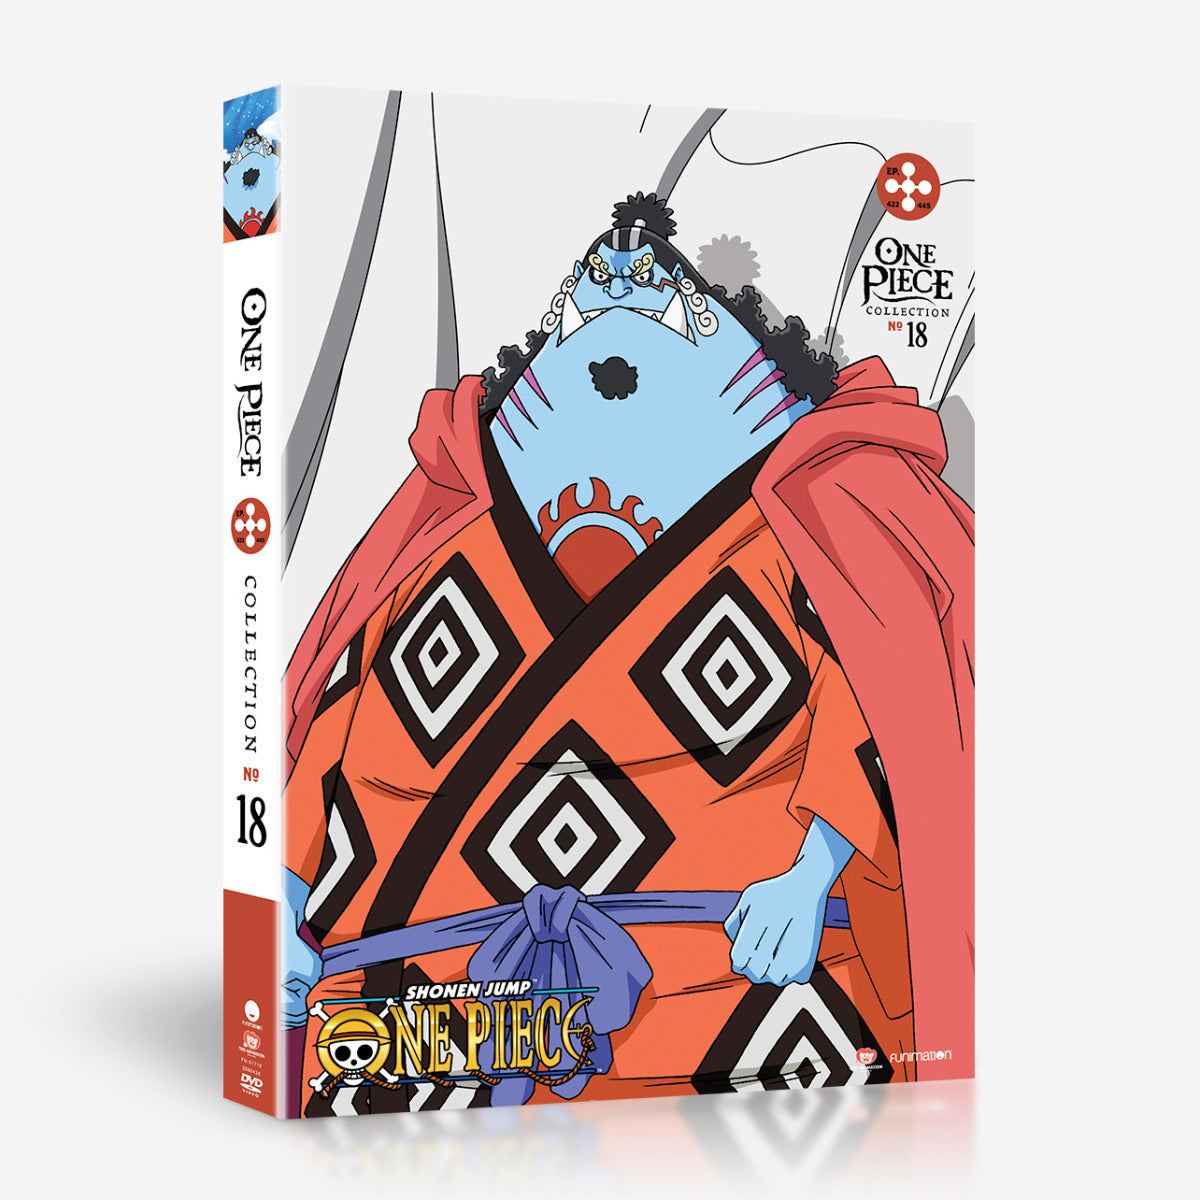 One Piece - Collection 18 - DVD image count 0